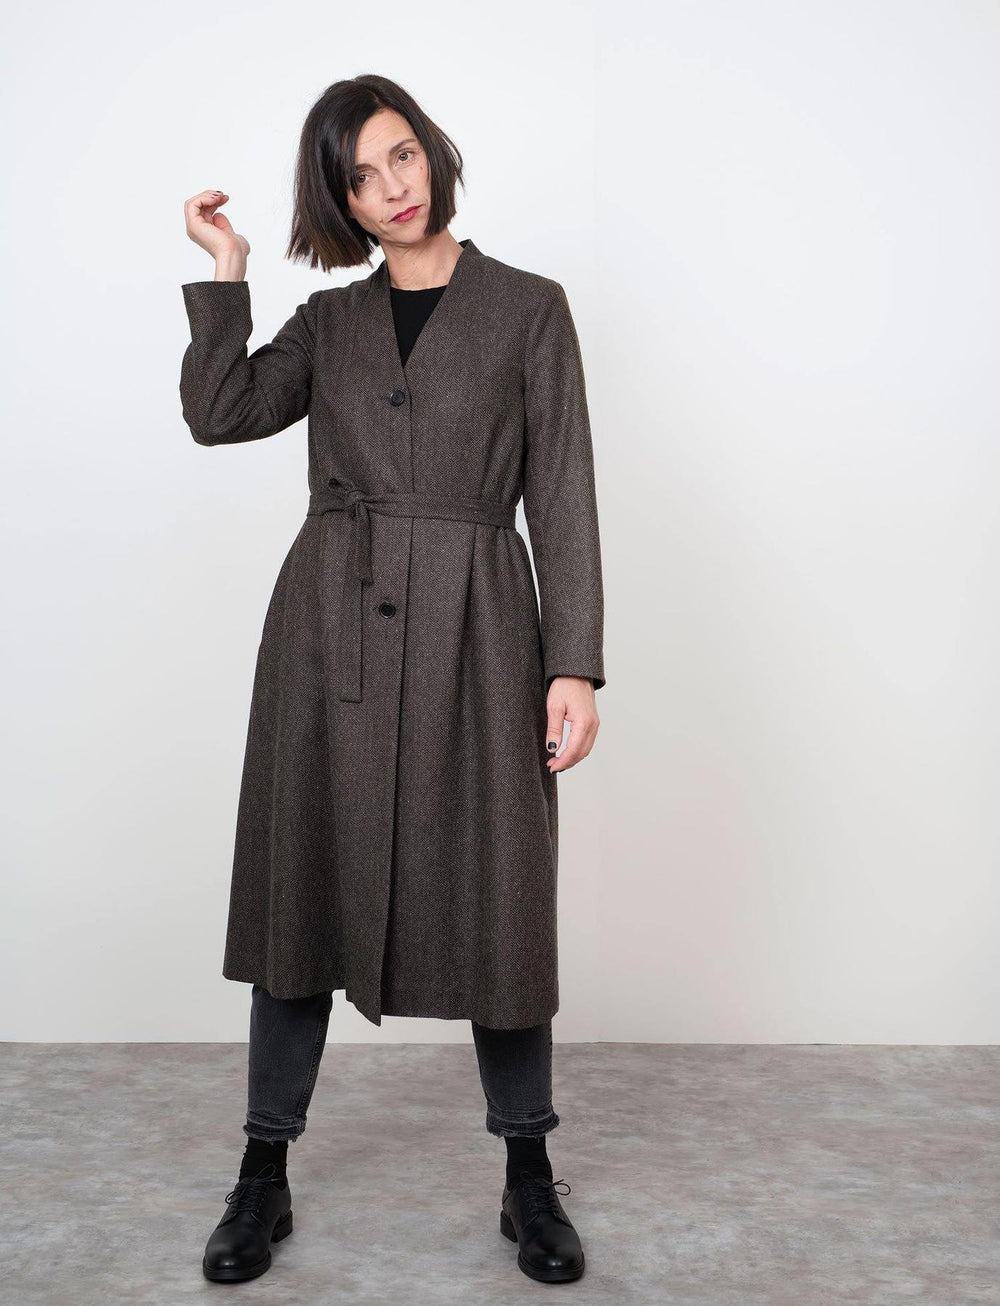 Woman wearing the V-Neck Coat sewing pattern from The Assembly Line on The Fold Line. A coat pattern made in cotton twill, lightweight canvas or wool fabrics, featuring a stand-up collar, V-neck opening, three buttons mid-front, side seam pockets and self